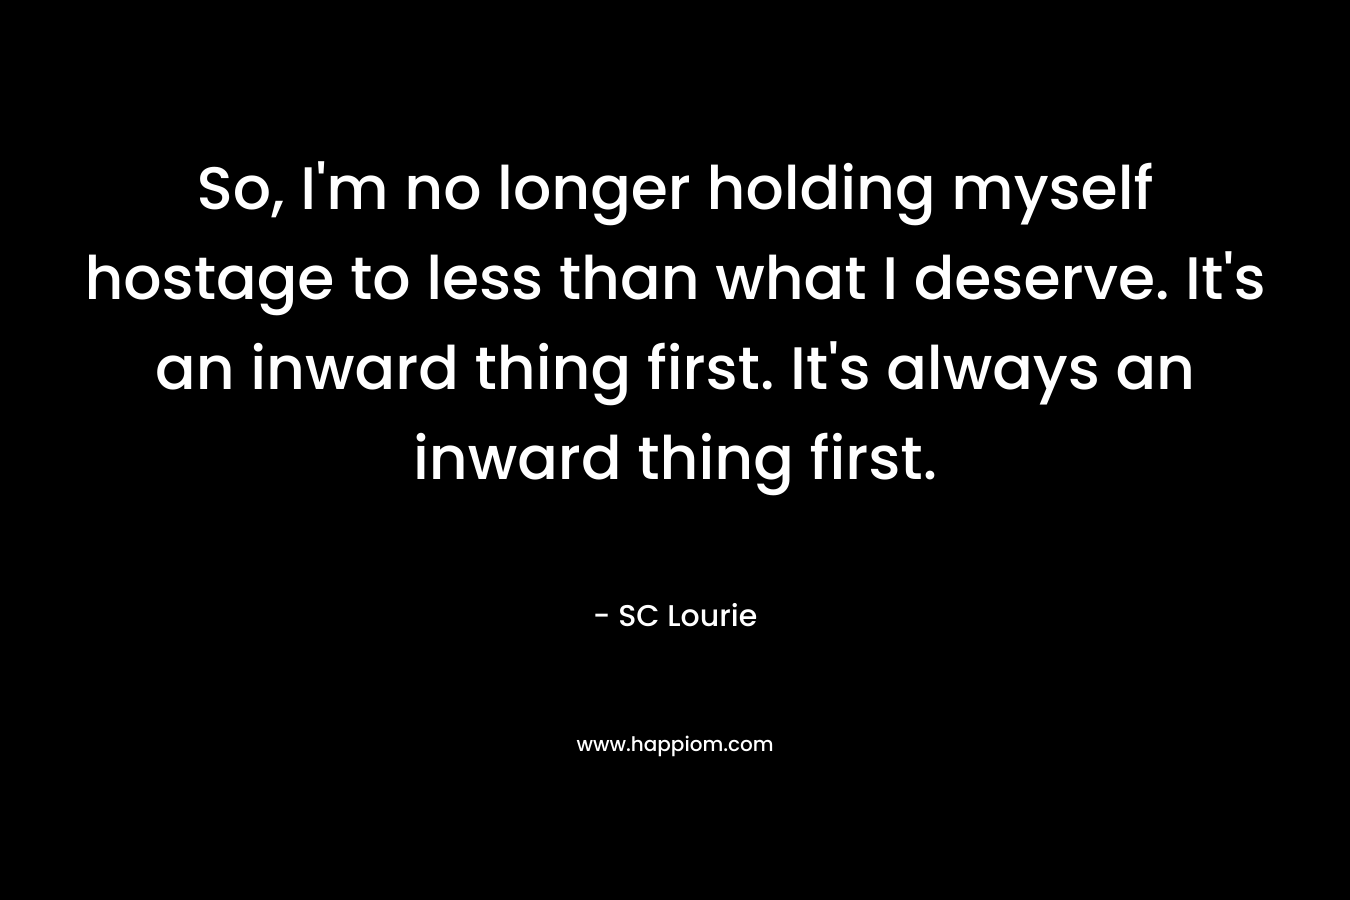 So, I’m no longer holding myself  hostage to less than what I deserve. It’s an inward thing first. It’s always an inward thing first. – SC Lourie